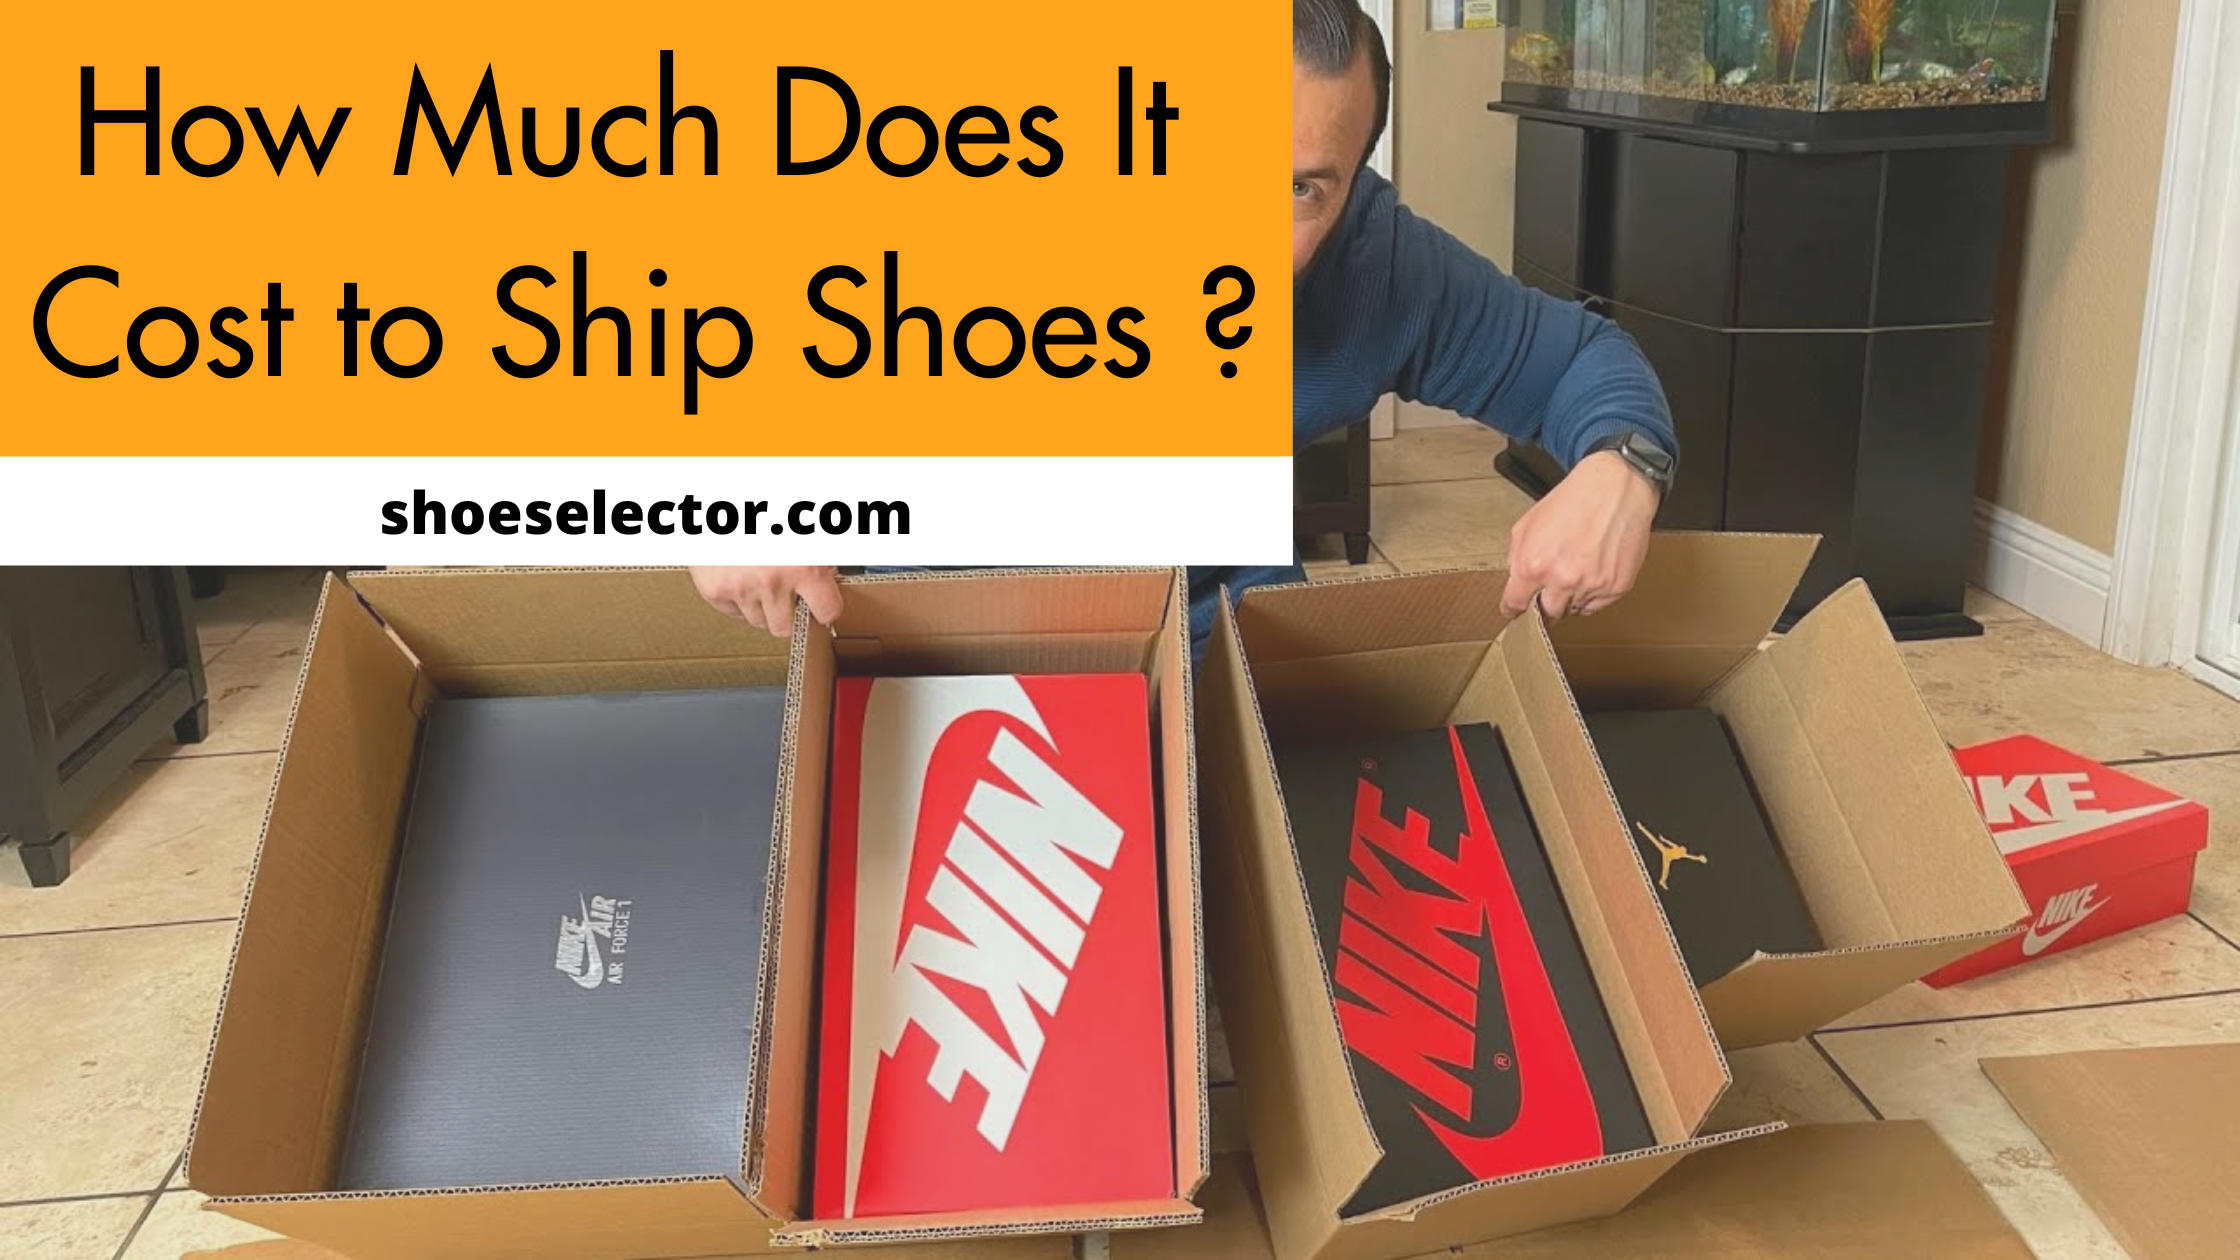 How Much Does It Cost to Ship Shoes? - Quick Guide